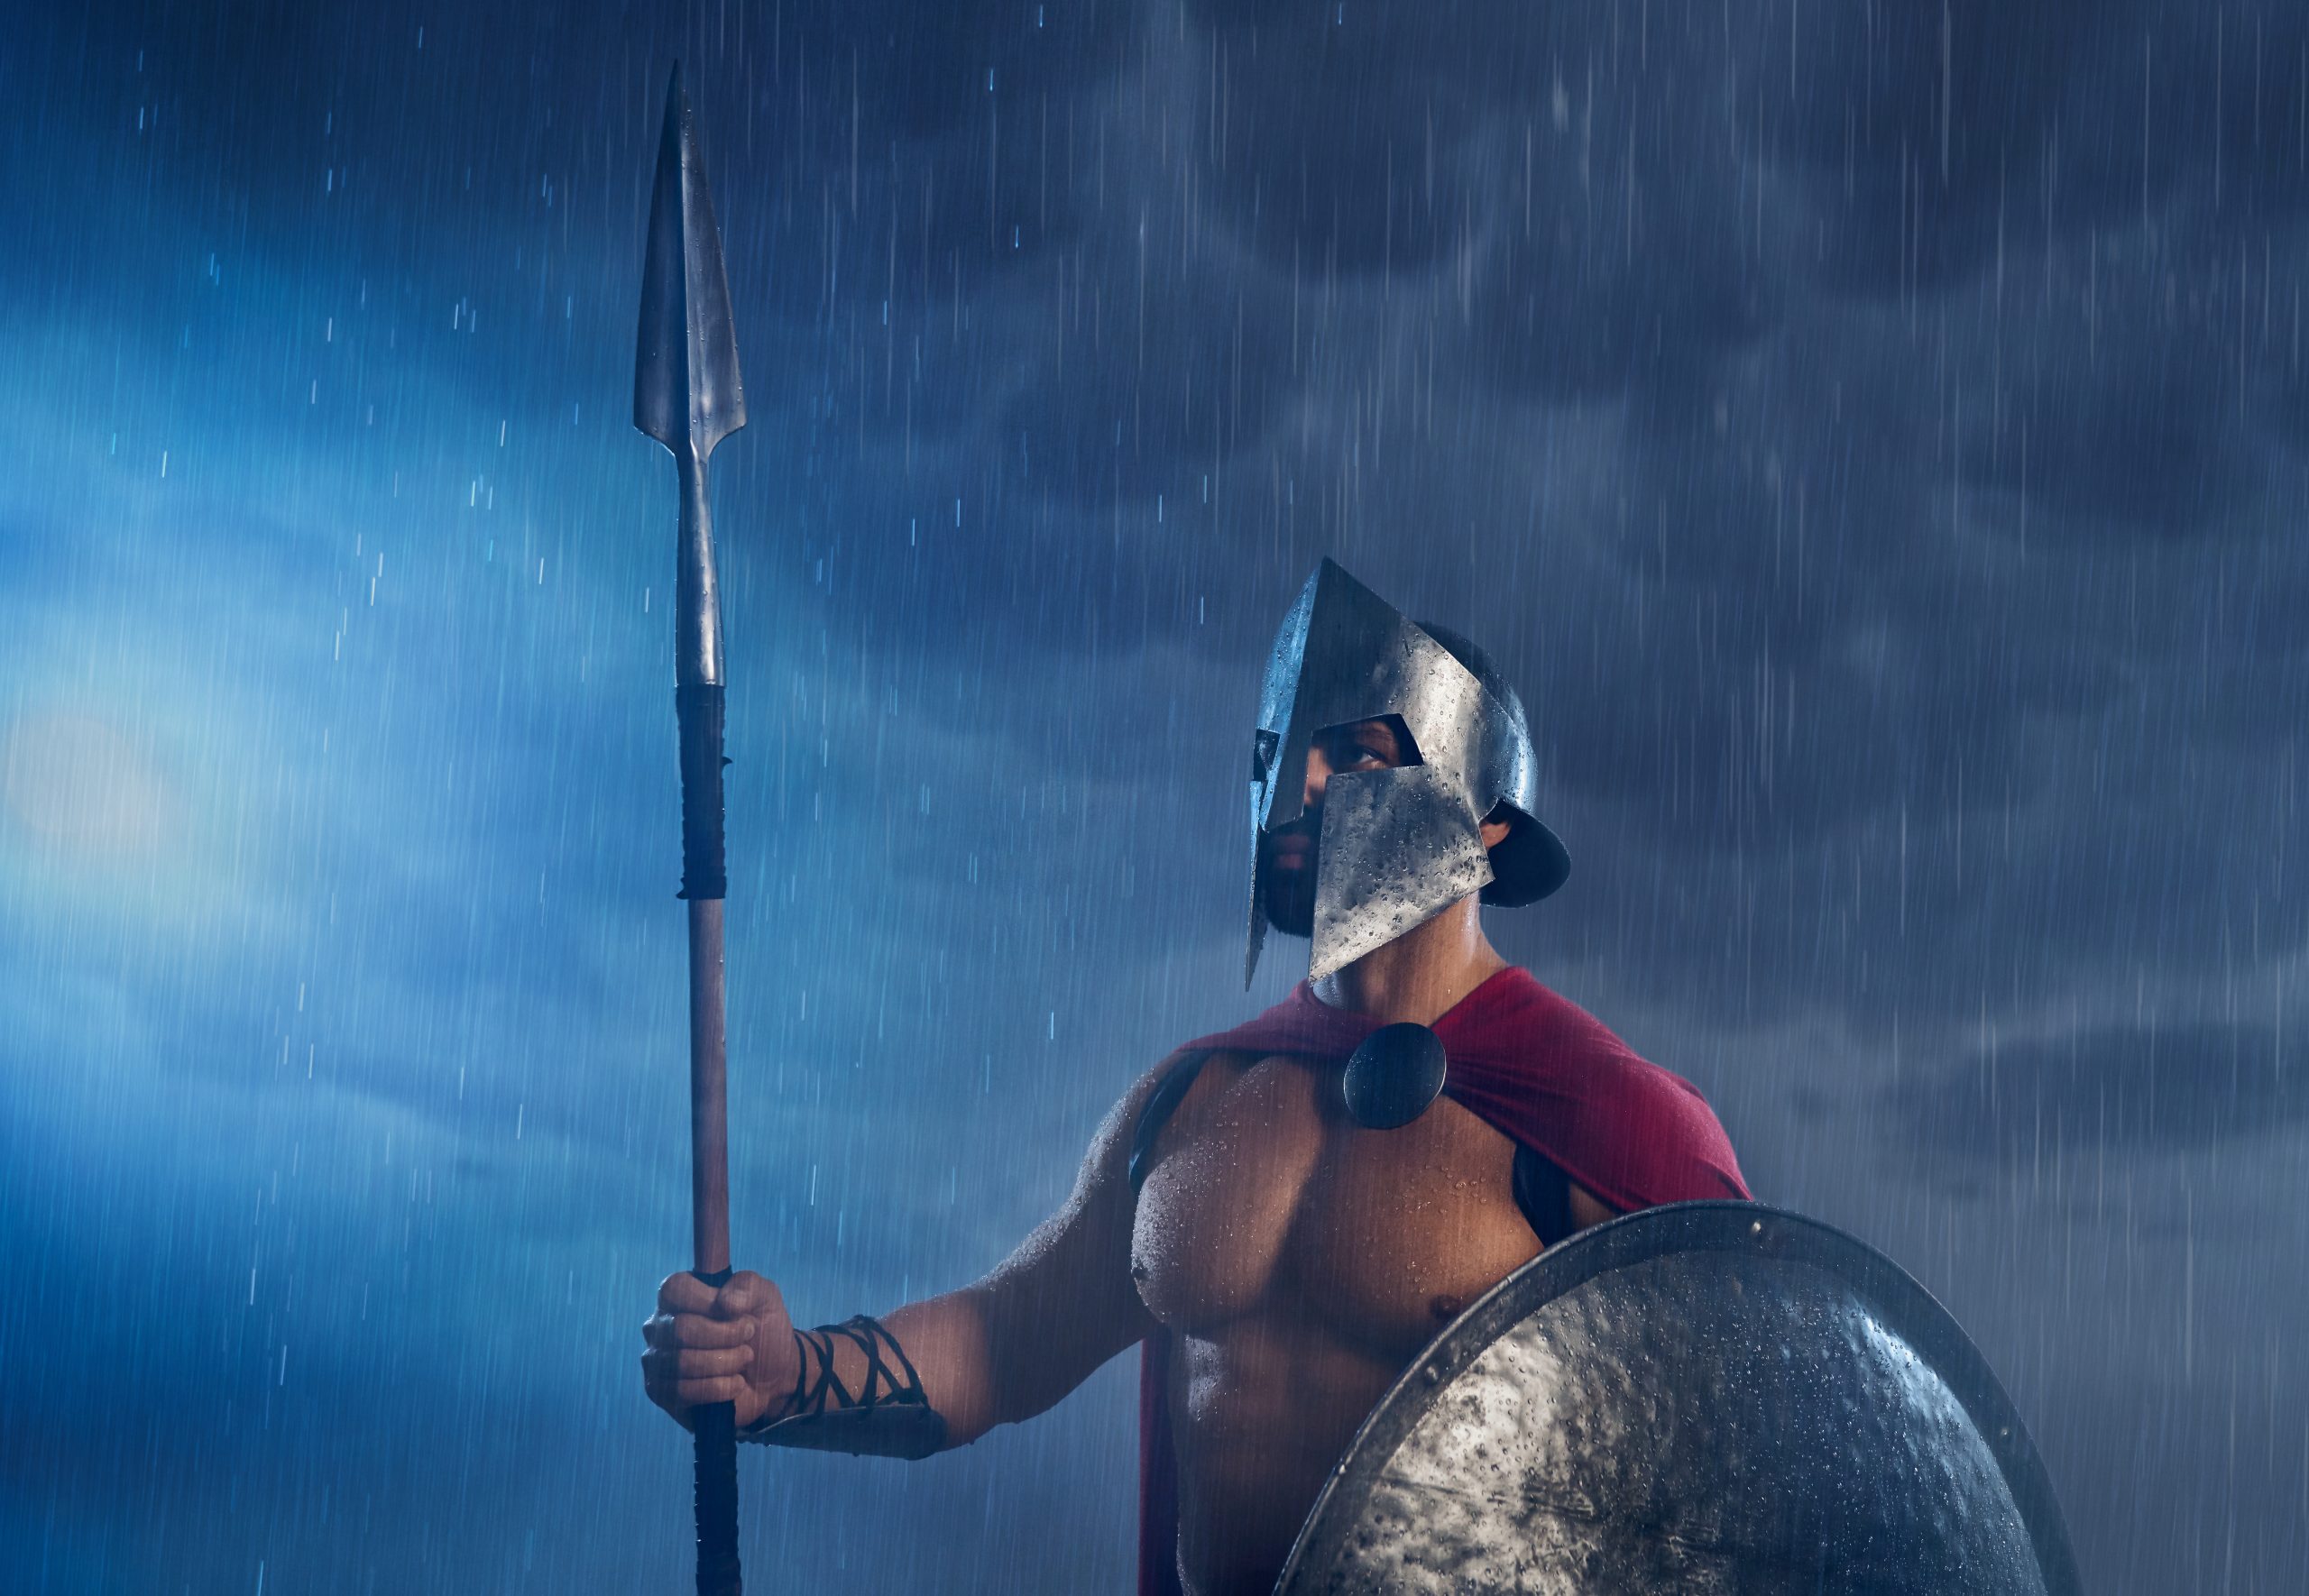 Spartan warrior with spear and shield.